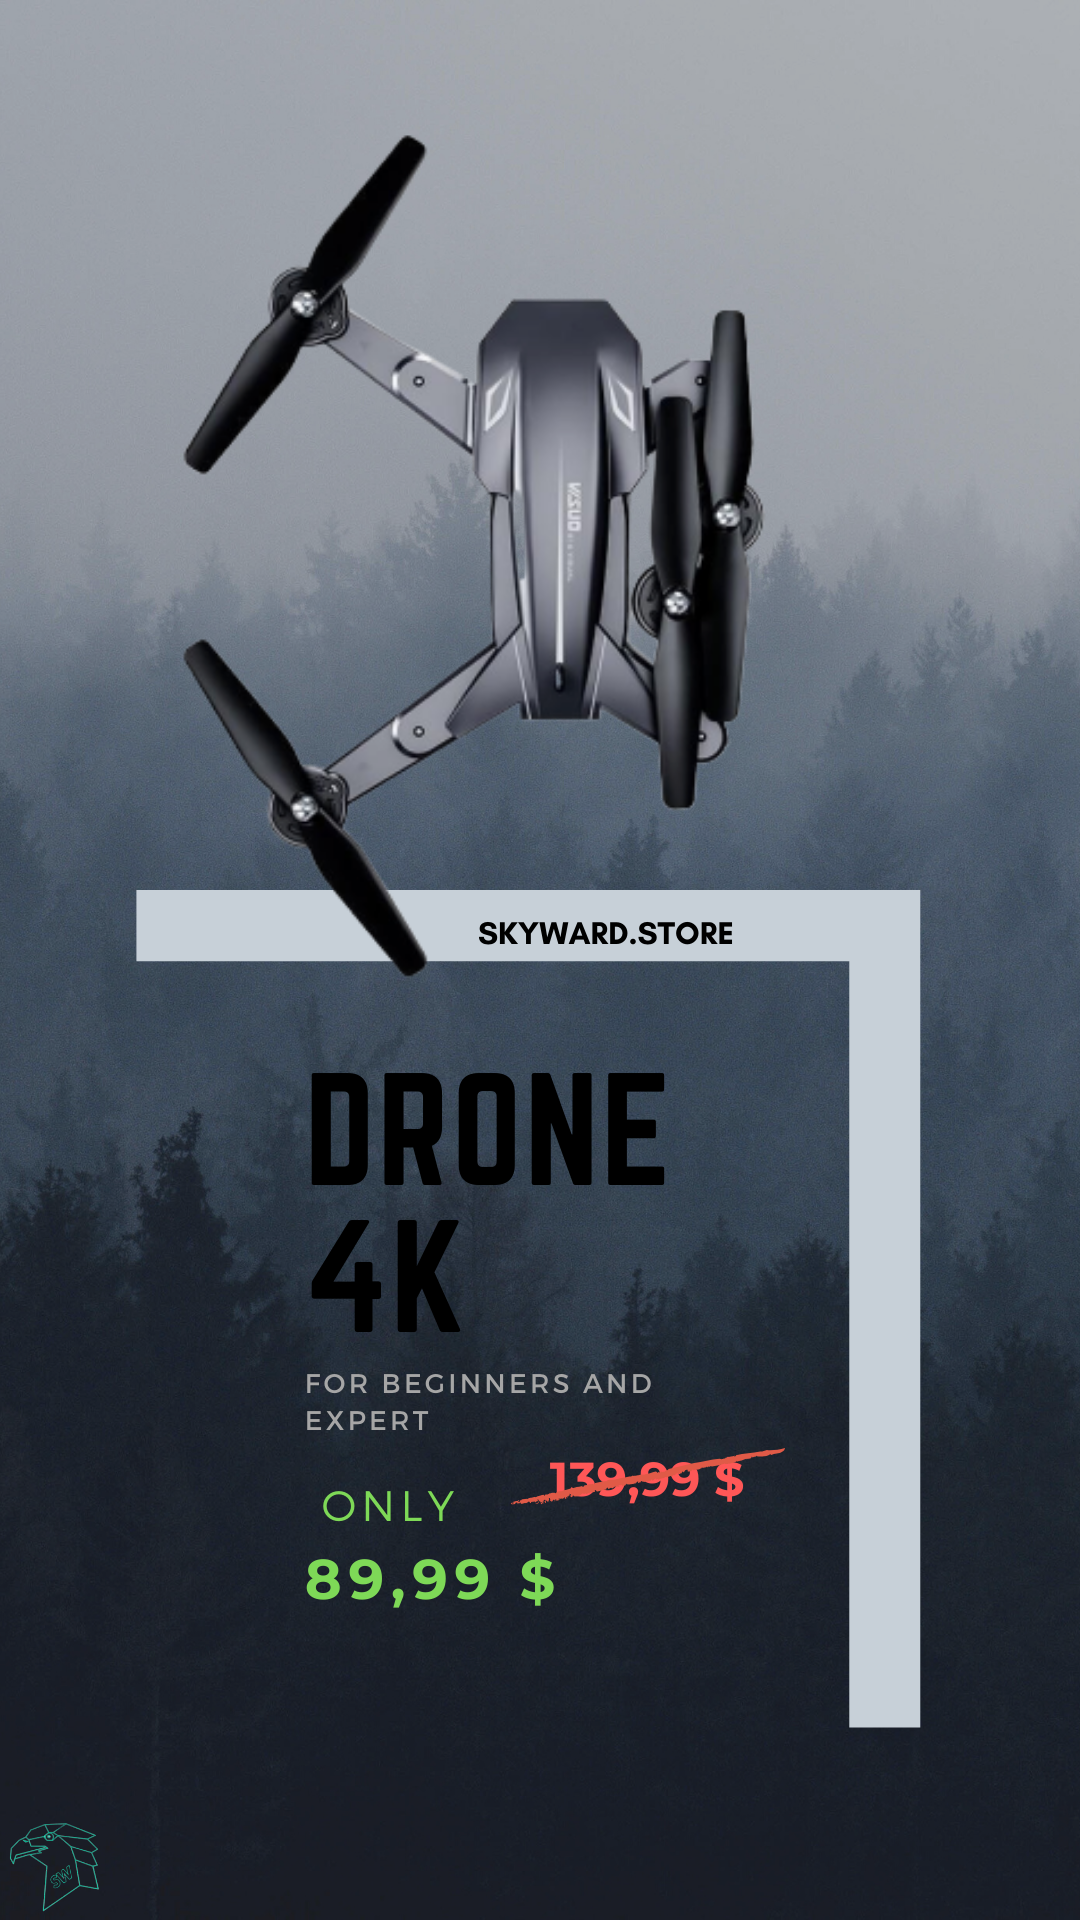 Drone with dual camera in 4k